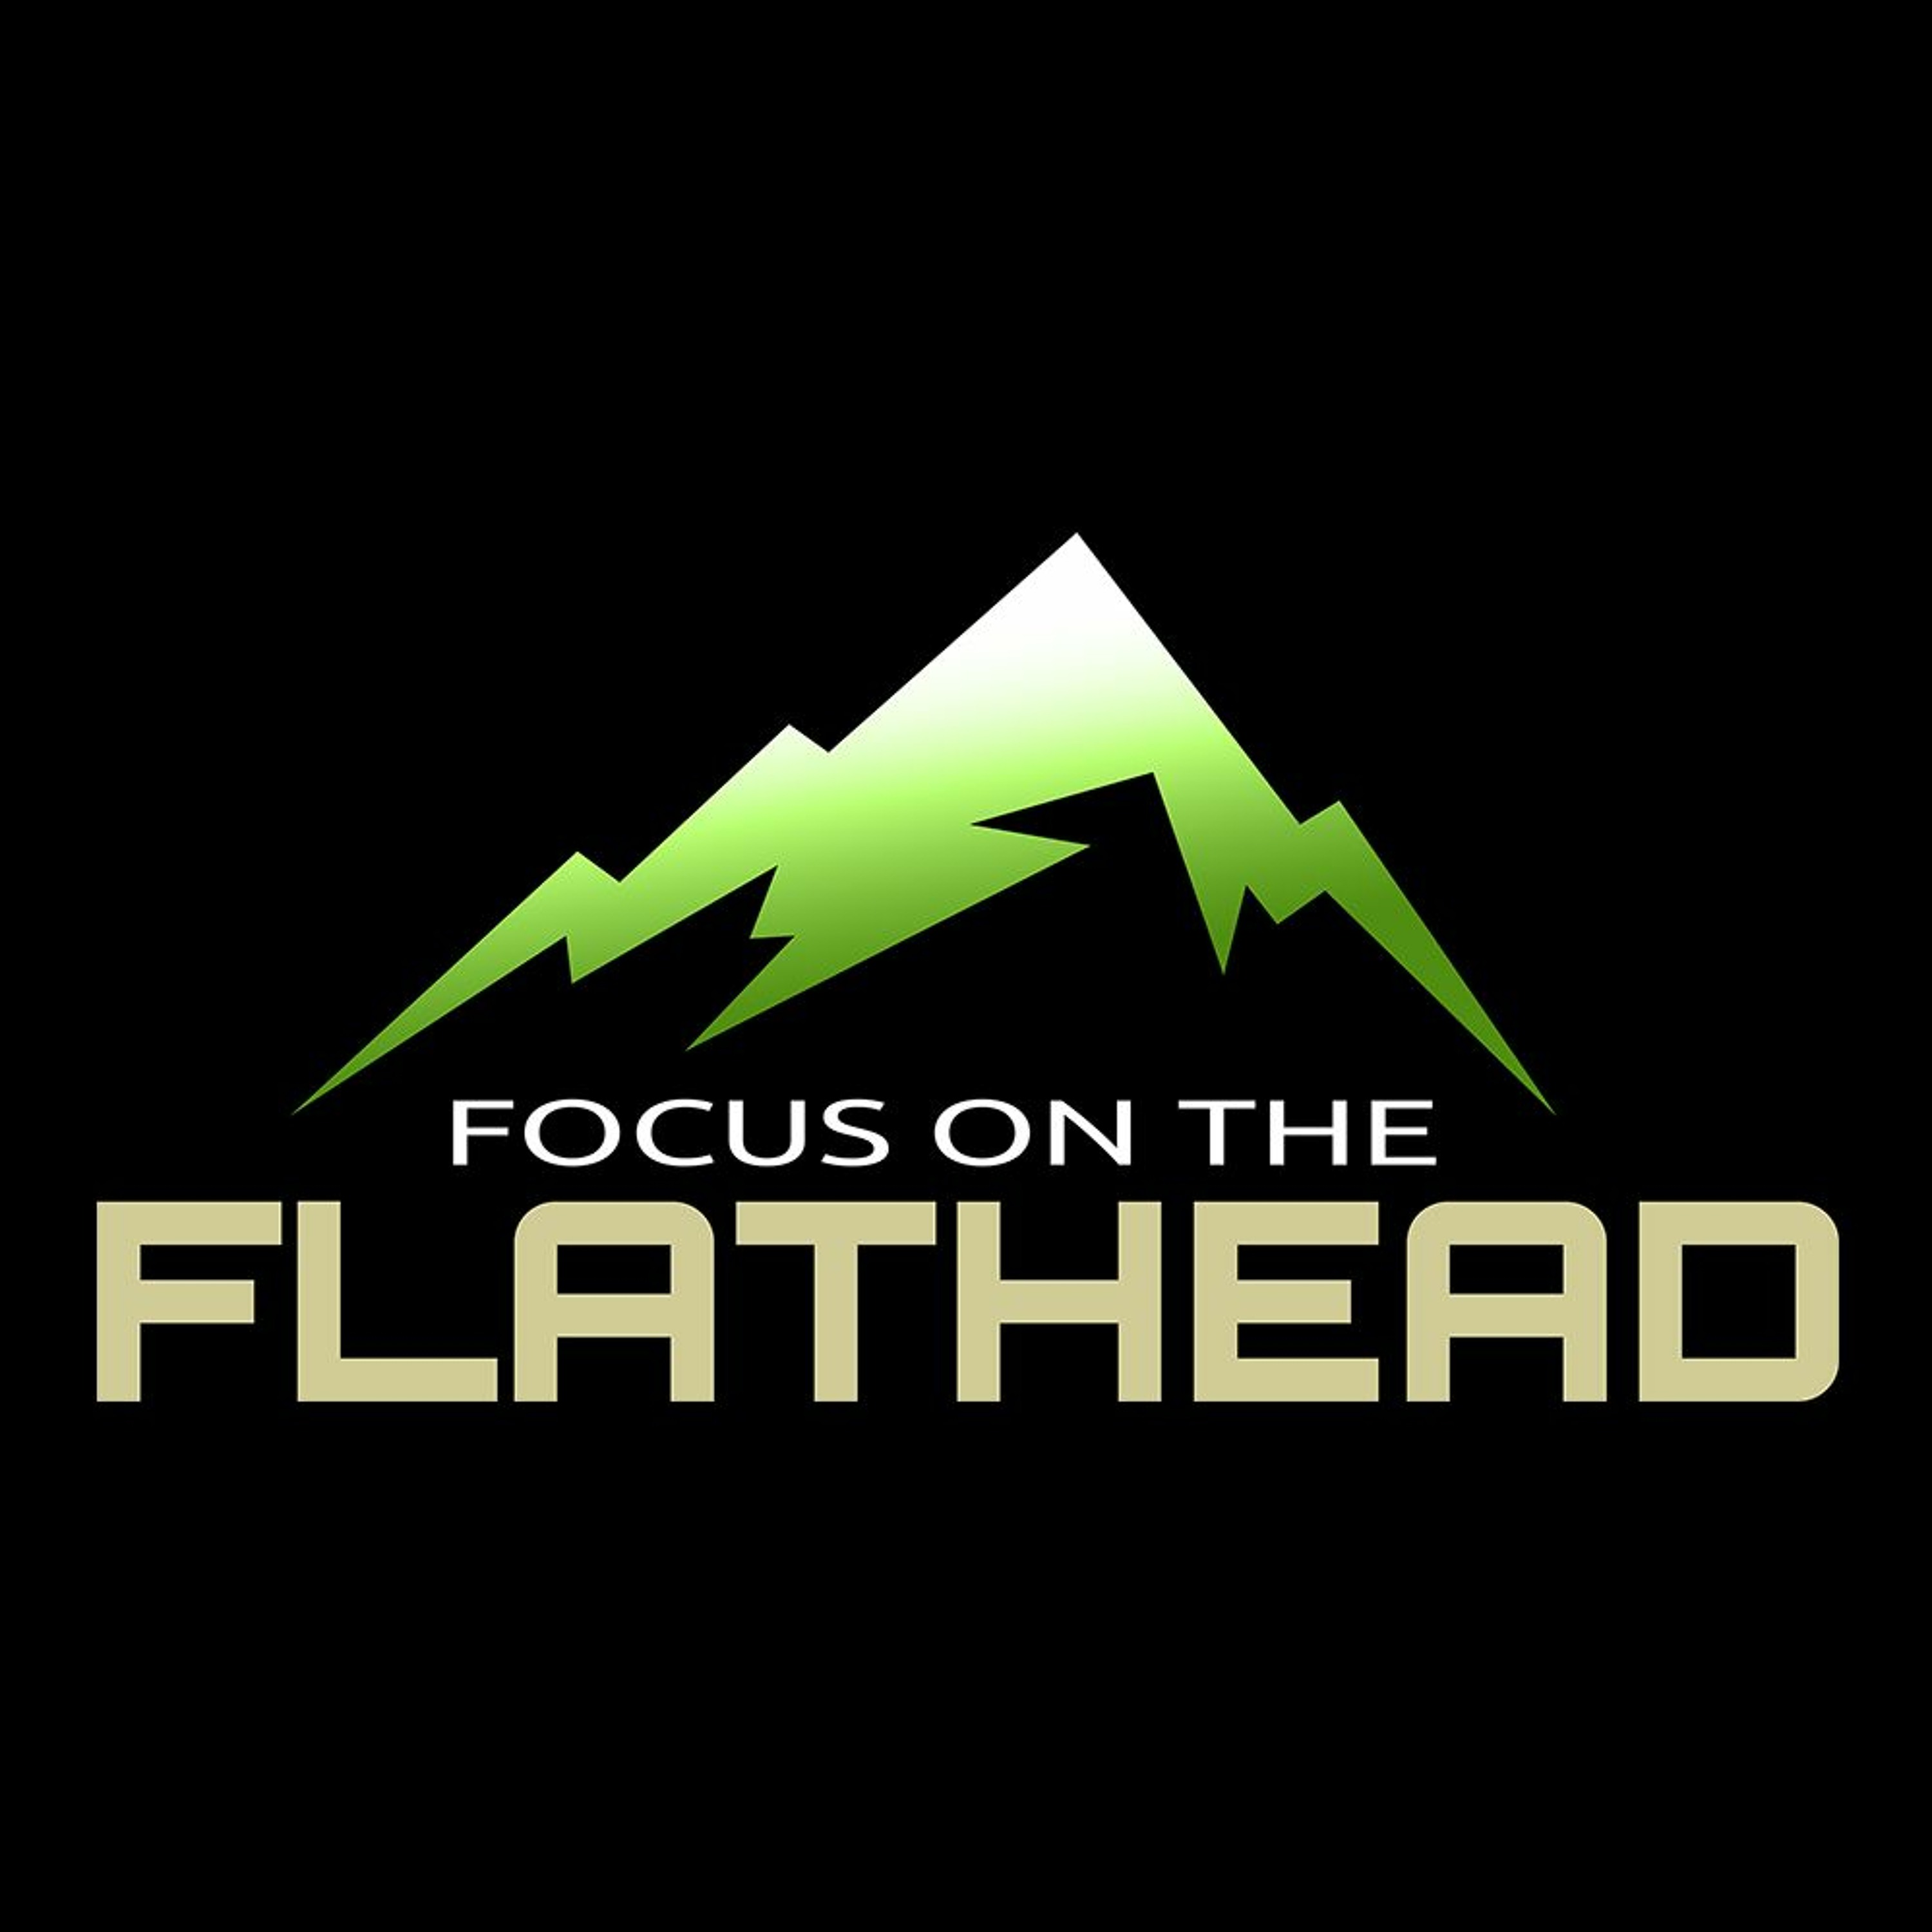 Artists and Craftsmen of the Flathead